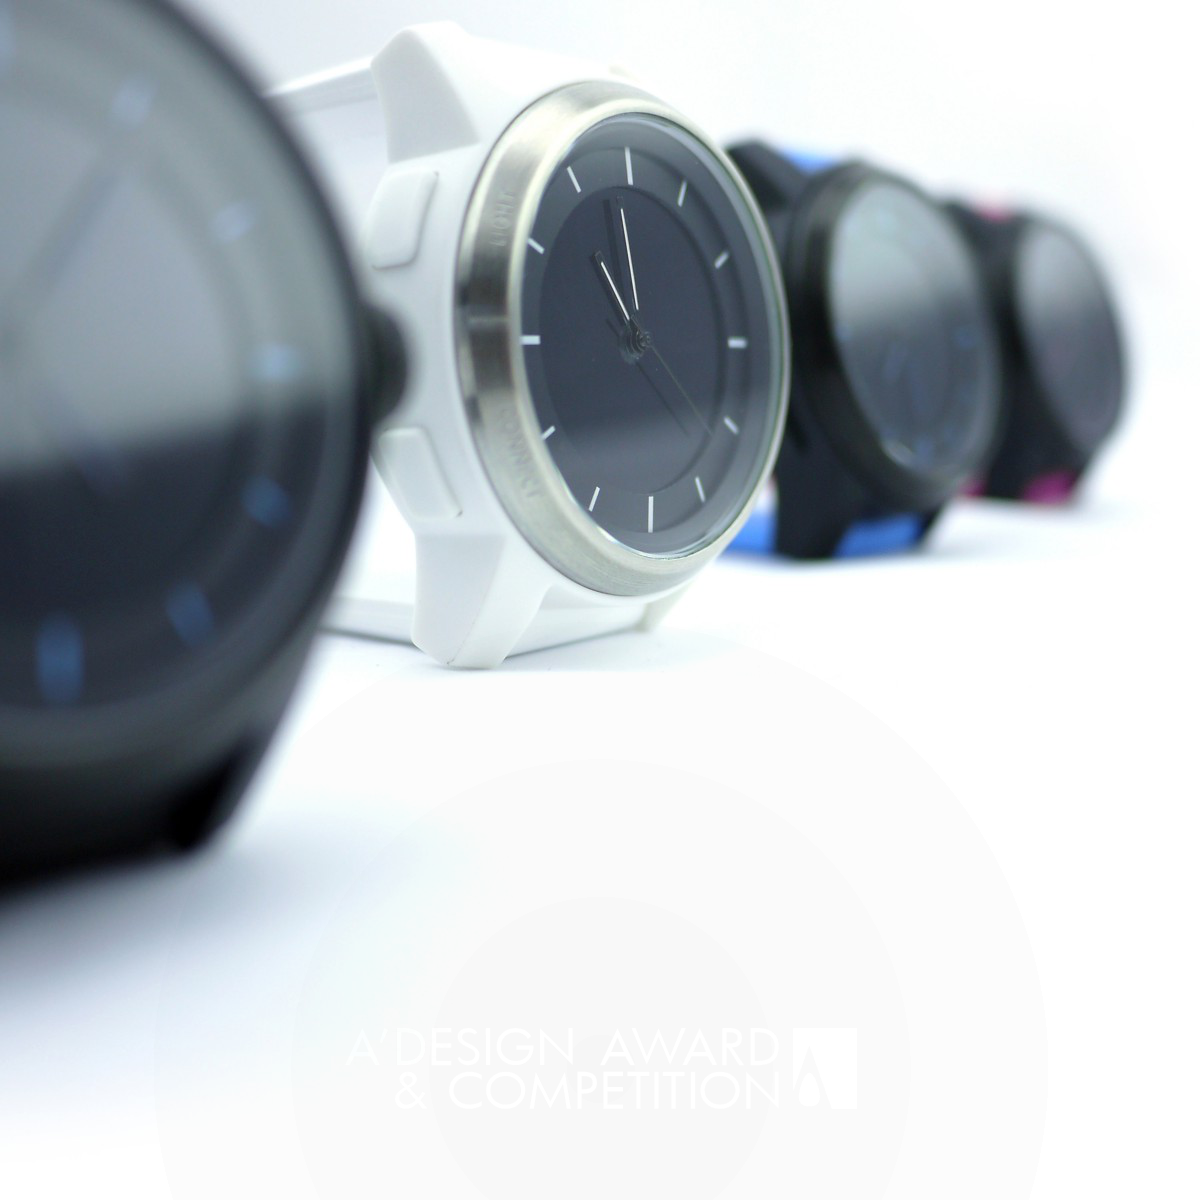 COOKOO Connected Watch by CONNECTEDEVICE Ltd